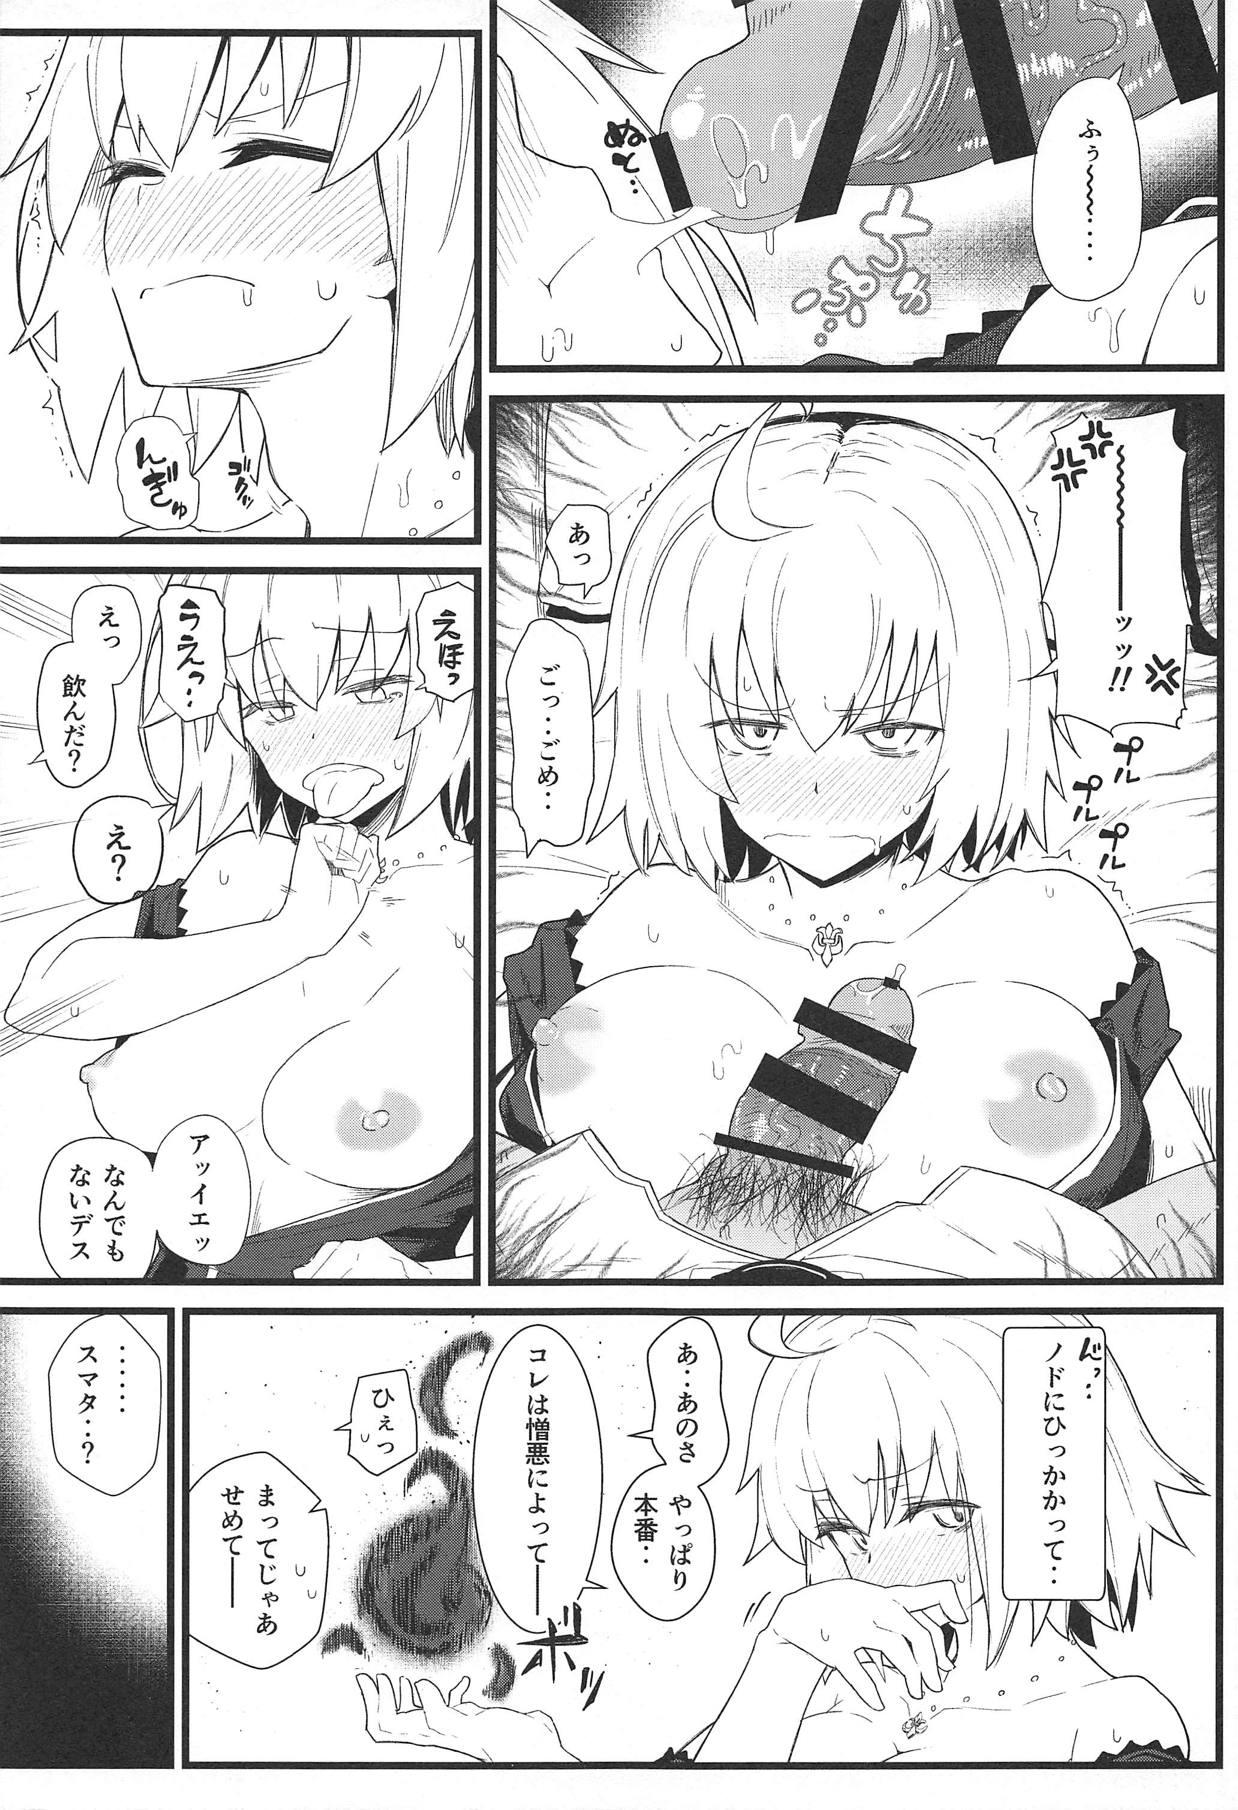 People Having Sex GIRLFriend's 15 - Fate grand order Transex - Page 8